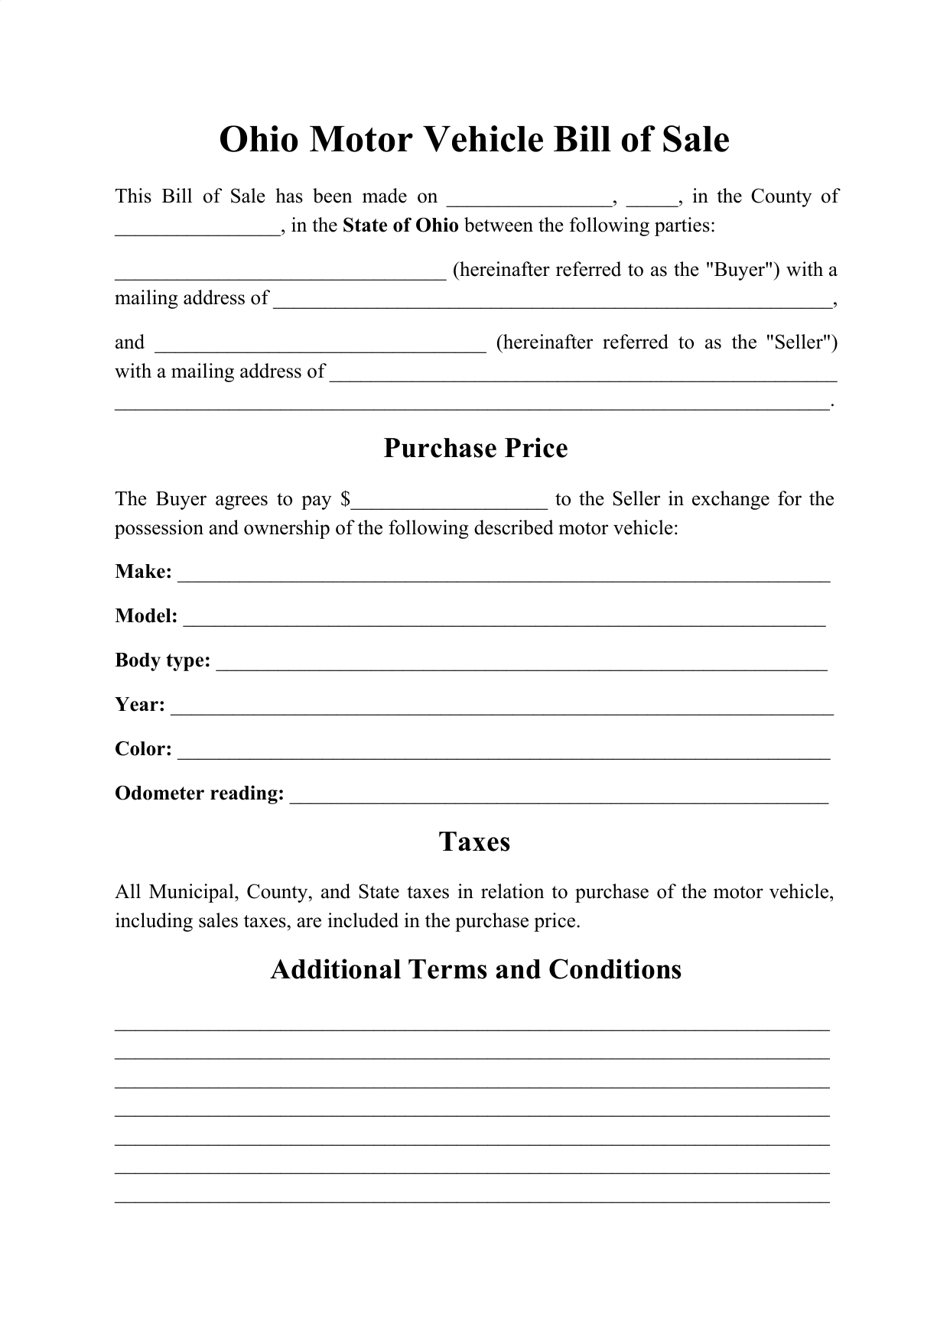 Motor Vehicle Bill of Sale Form - Ohio, Page 1